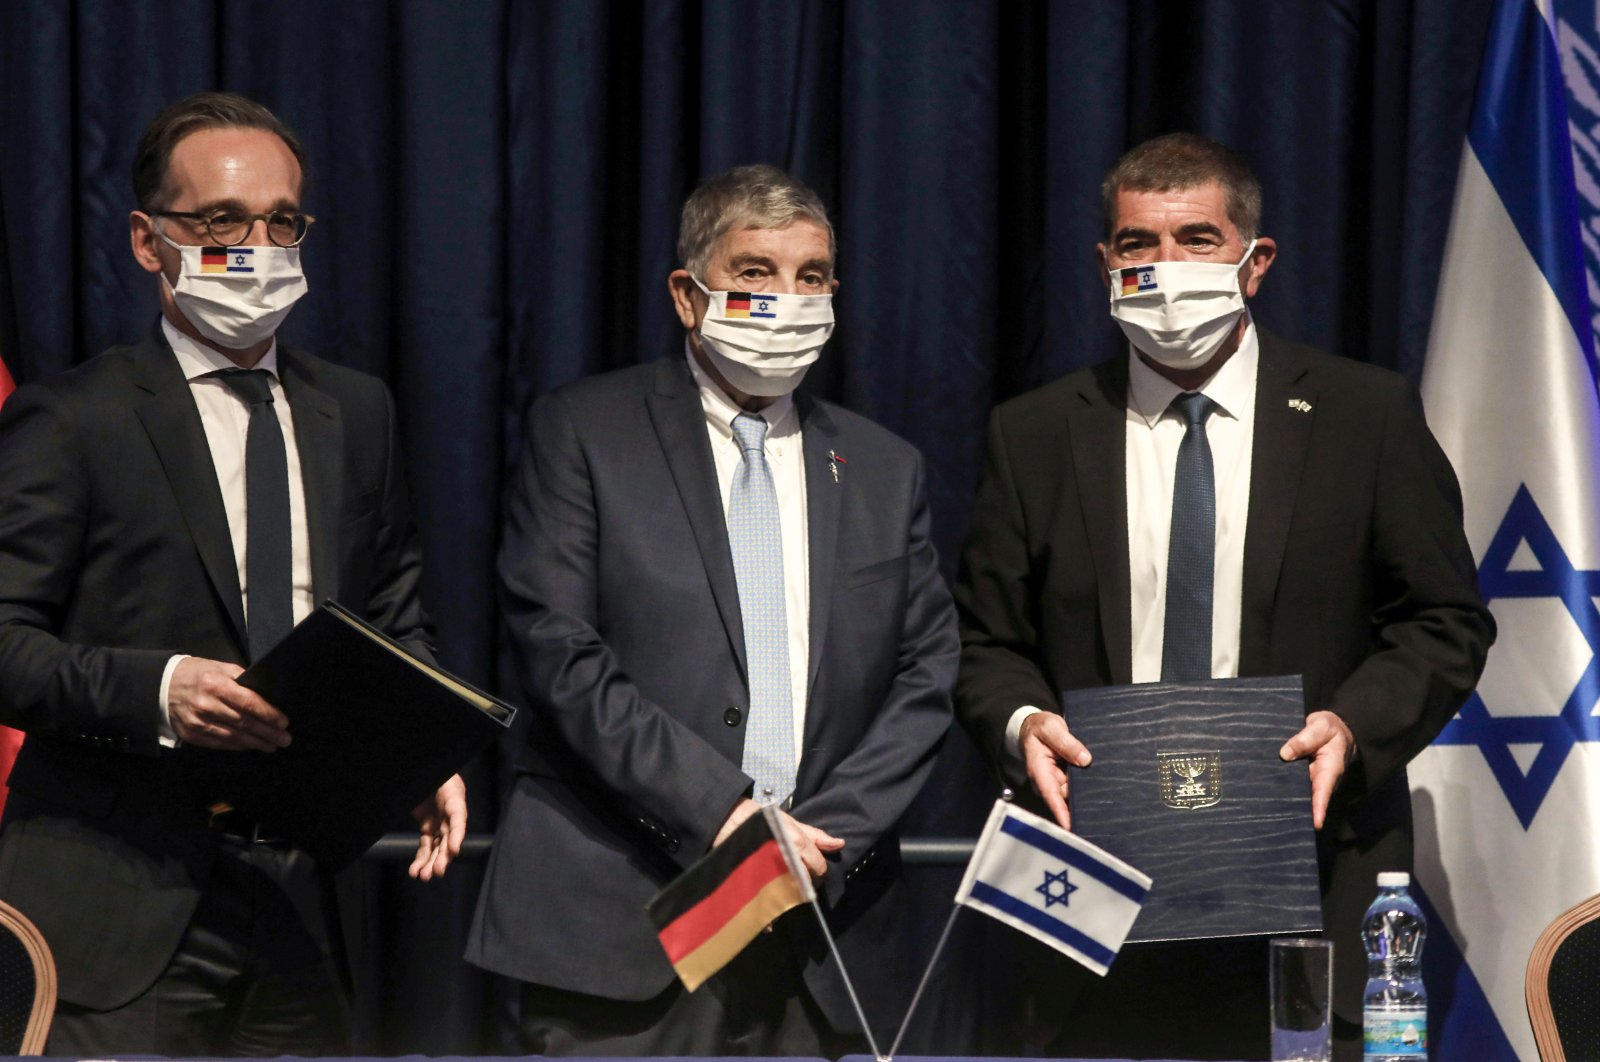 German Foreign Minister Heiko Maas (L), chairman of the Yad Vashem Holocaust Remembrance Center Avner Shalev (C) and Israeli Foreign Minister Gabi Ashkenazi (R) pose for a picture together after signing an agreement at the ministry headquarters in Jerusalem, Israel, June 10, 2020. (AFP Photo)